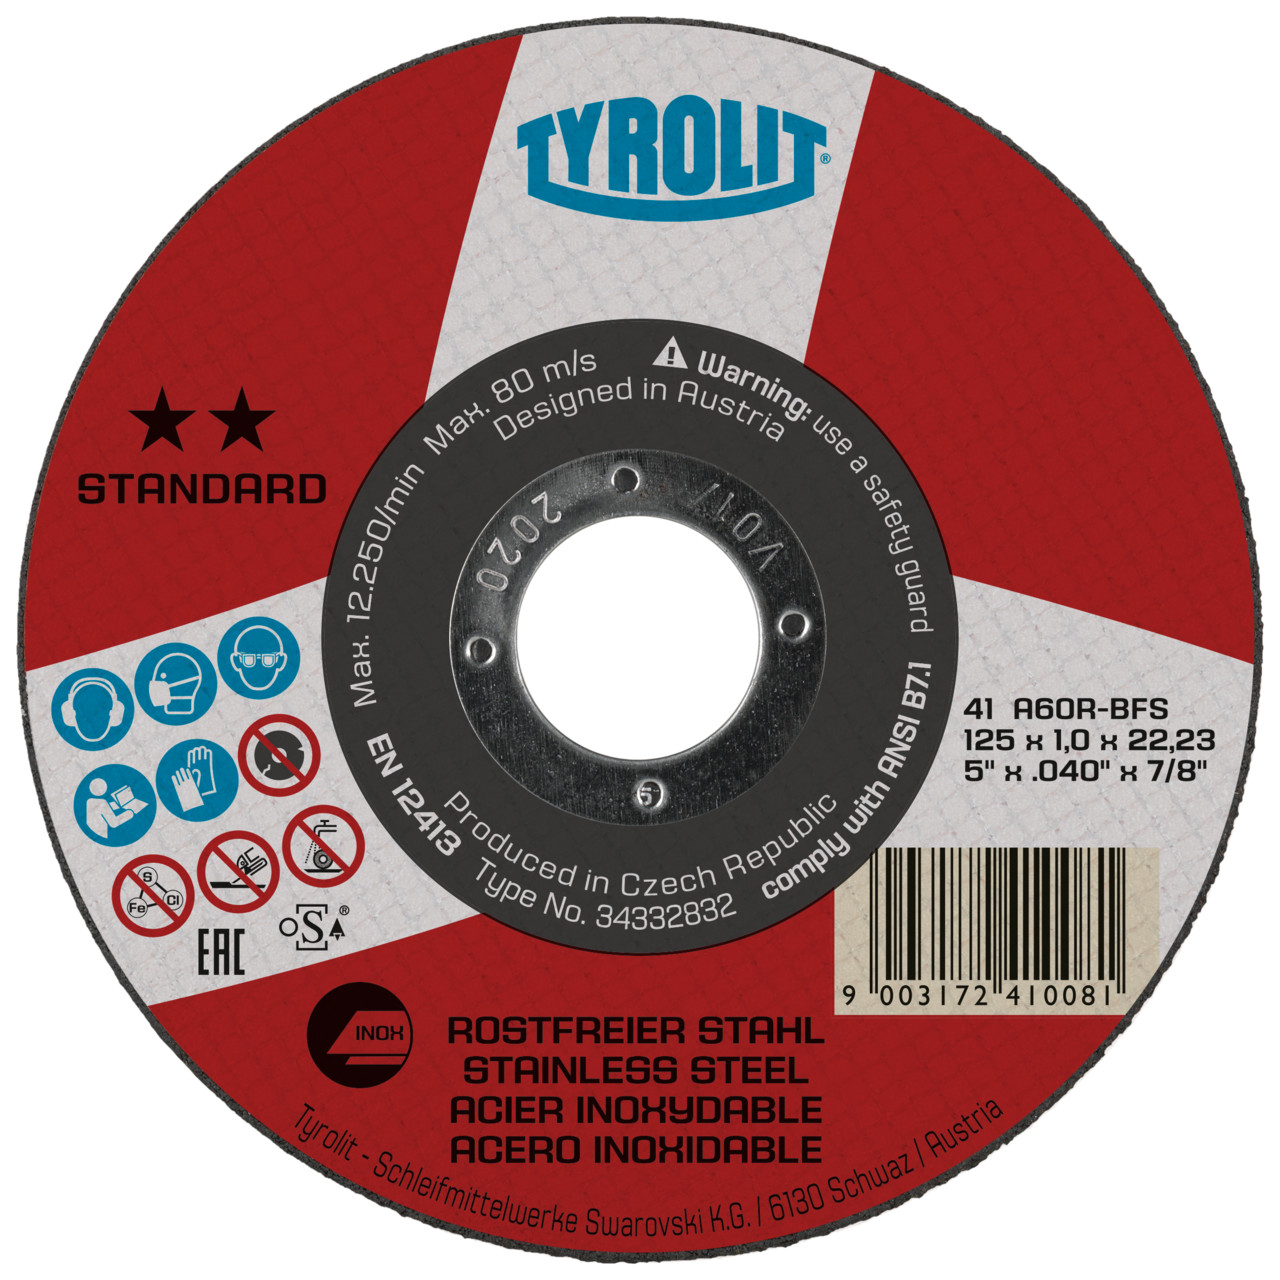 Tyrolit Cutting discs DxDxH 178x2.5x22.23 For stainless steel, shape: 41 - straight version, Art. 367577